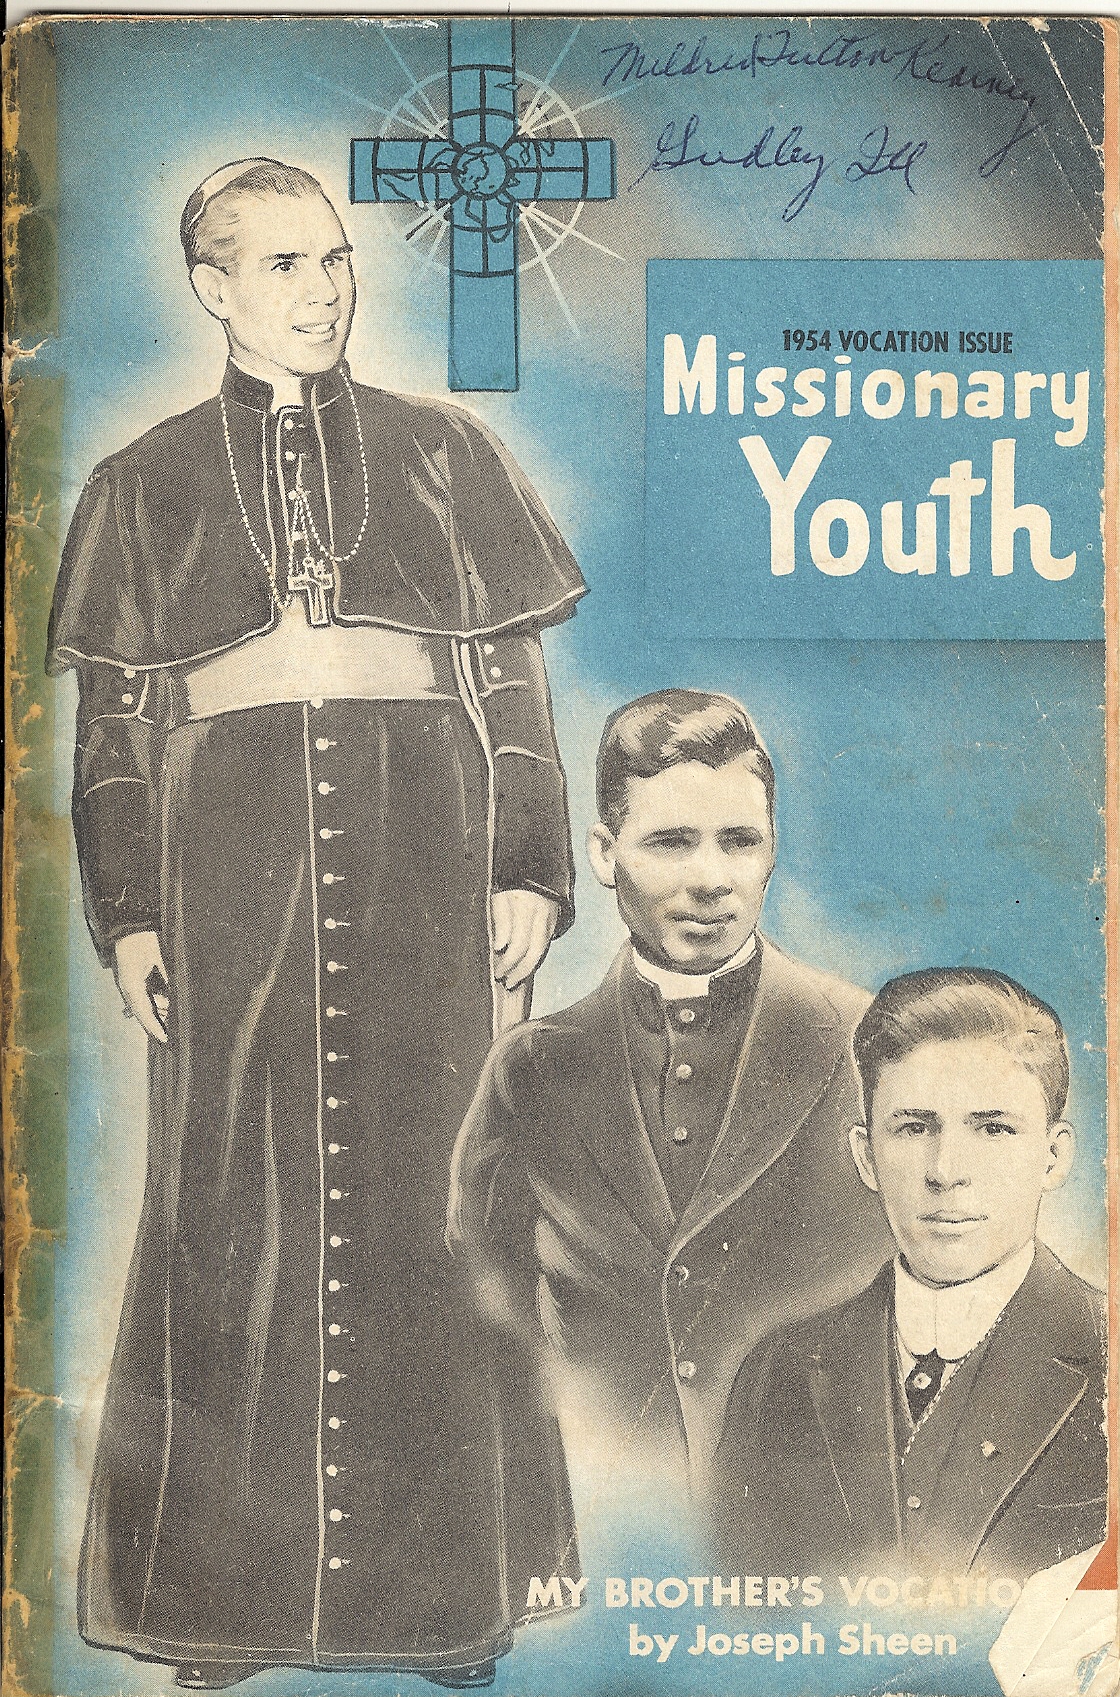 1954 Vocation Issue of "Missionary Youth"